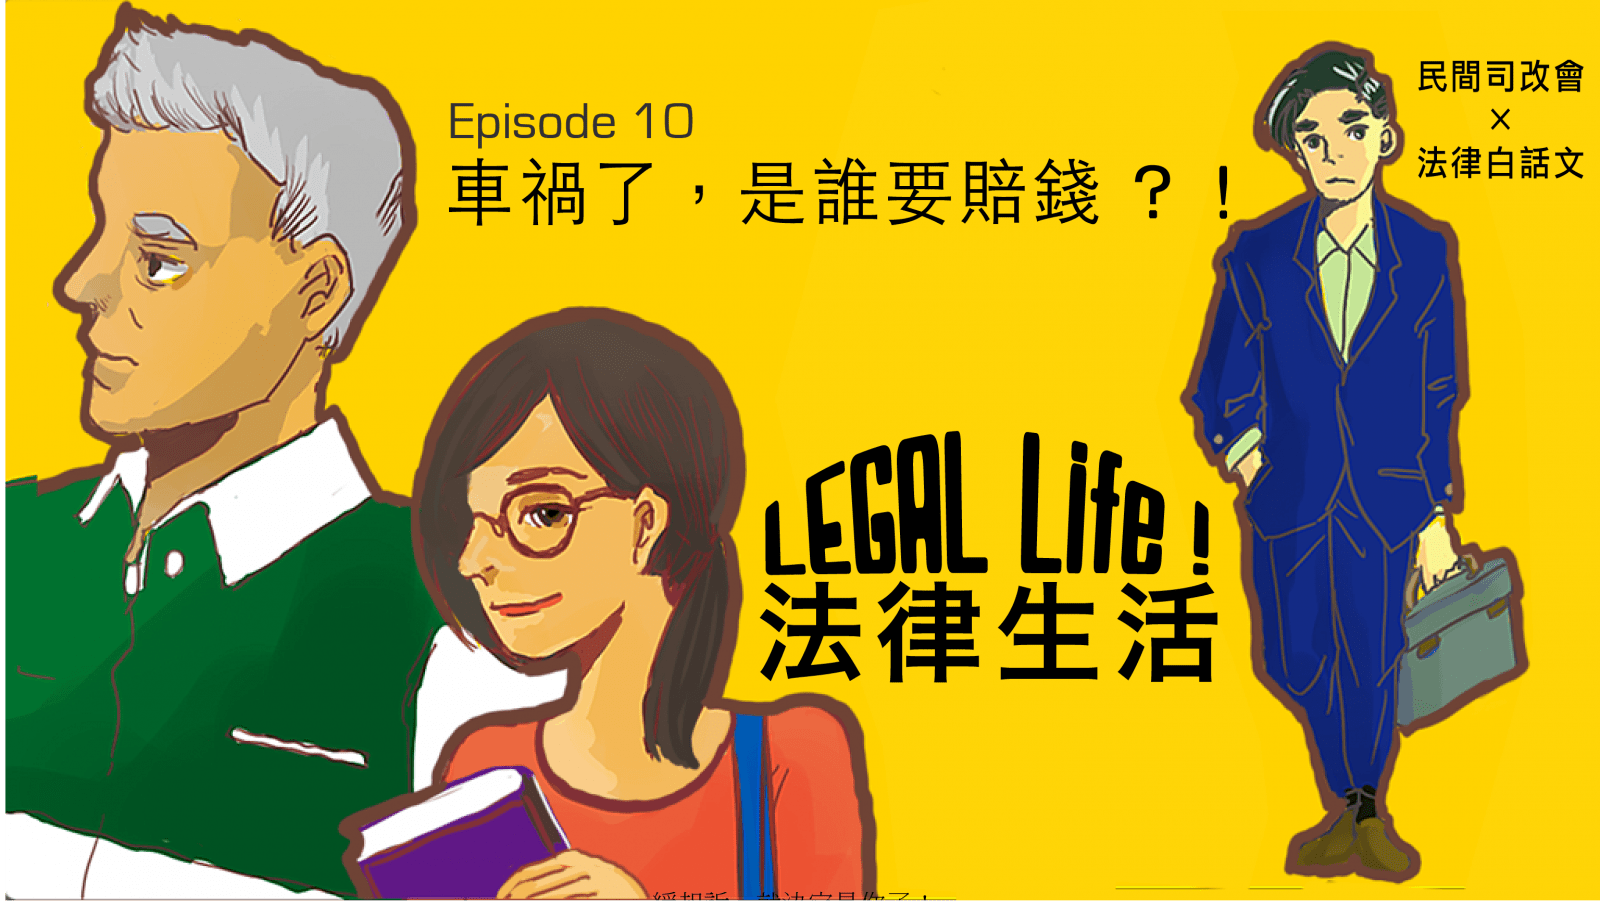 2016/08/legal-life1ep10.png